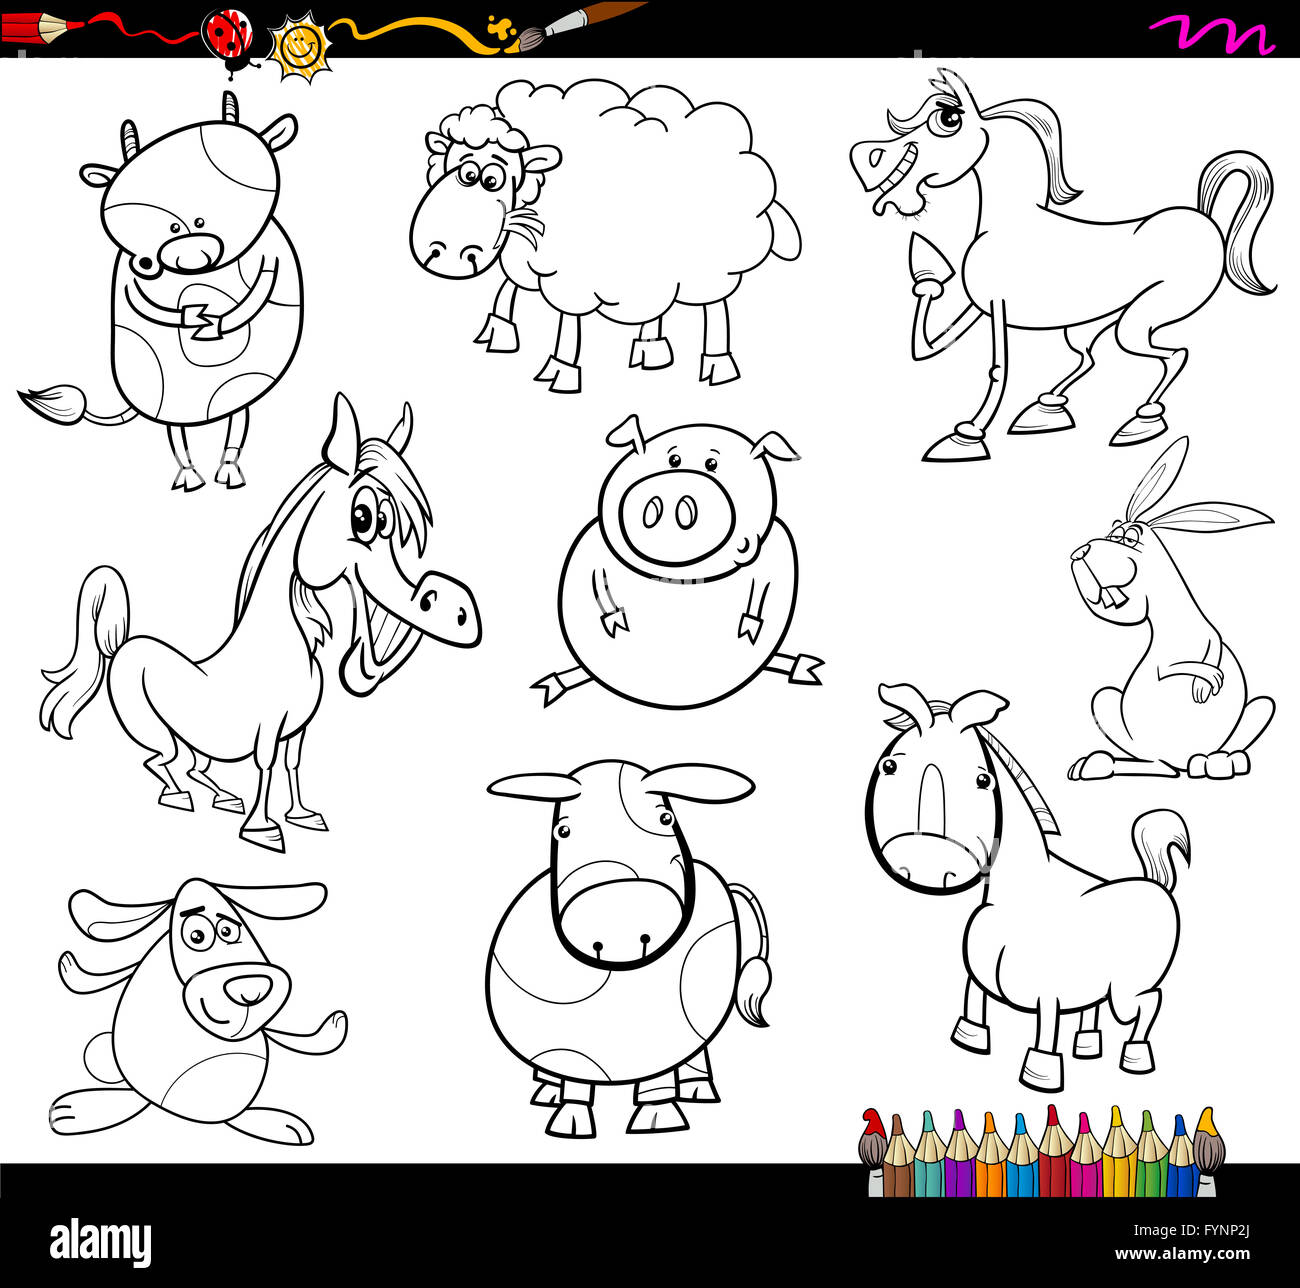 farm animals coloring page Stock Photo - Alamy